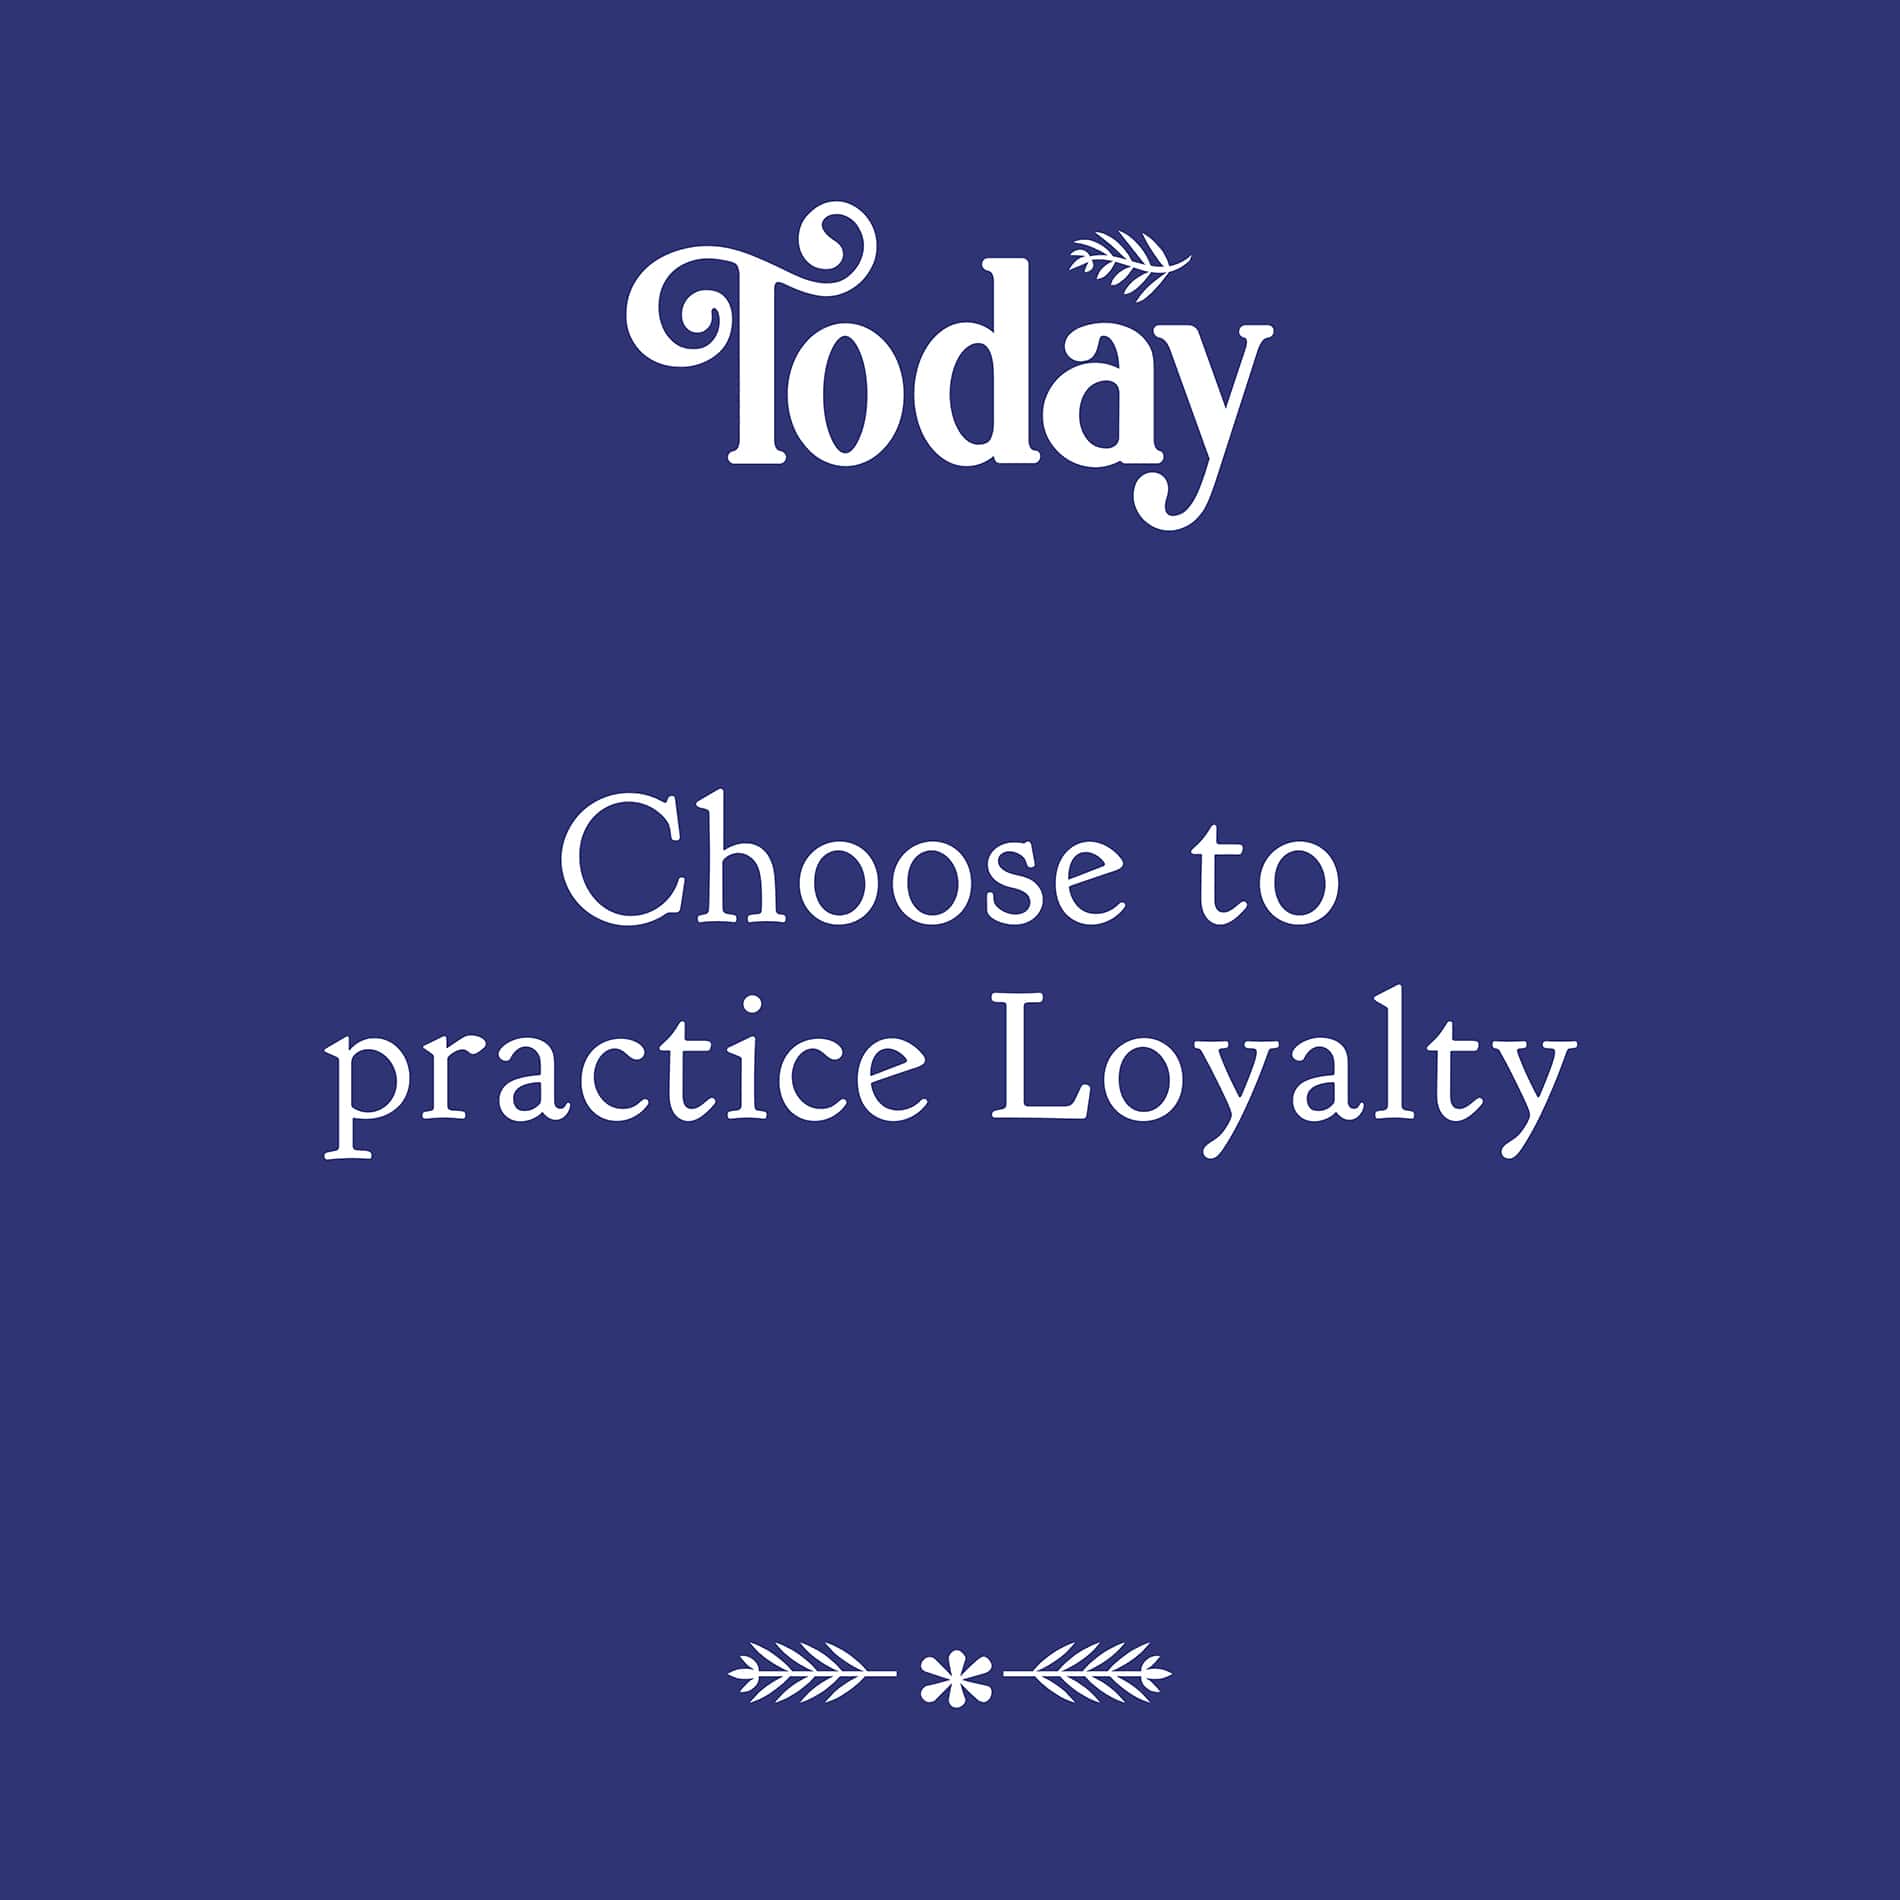 Today - Choose to practice loyalty